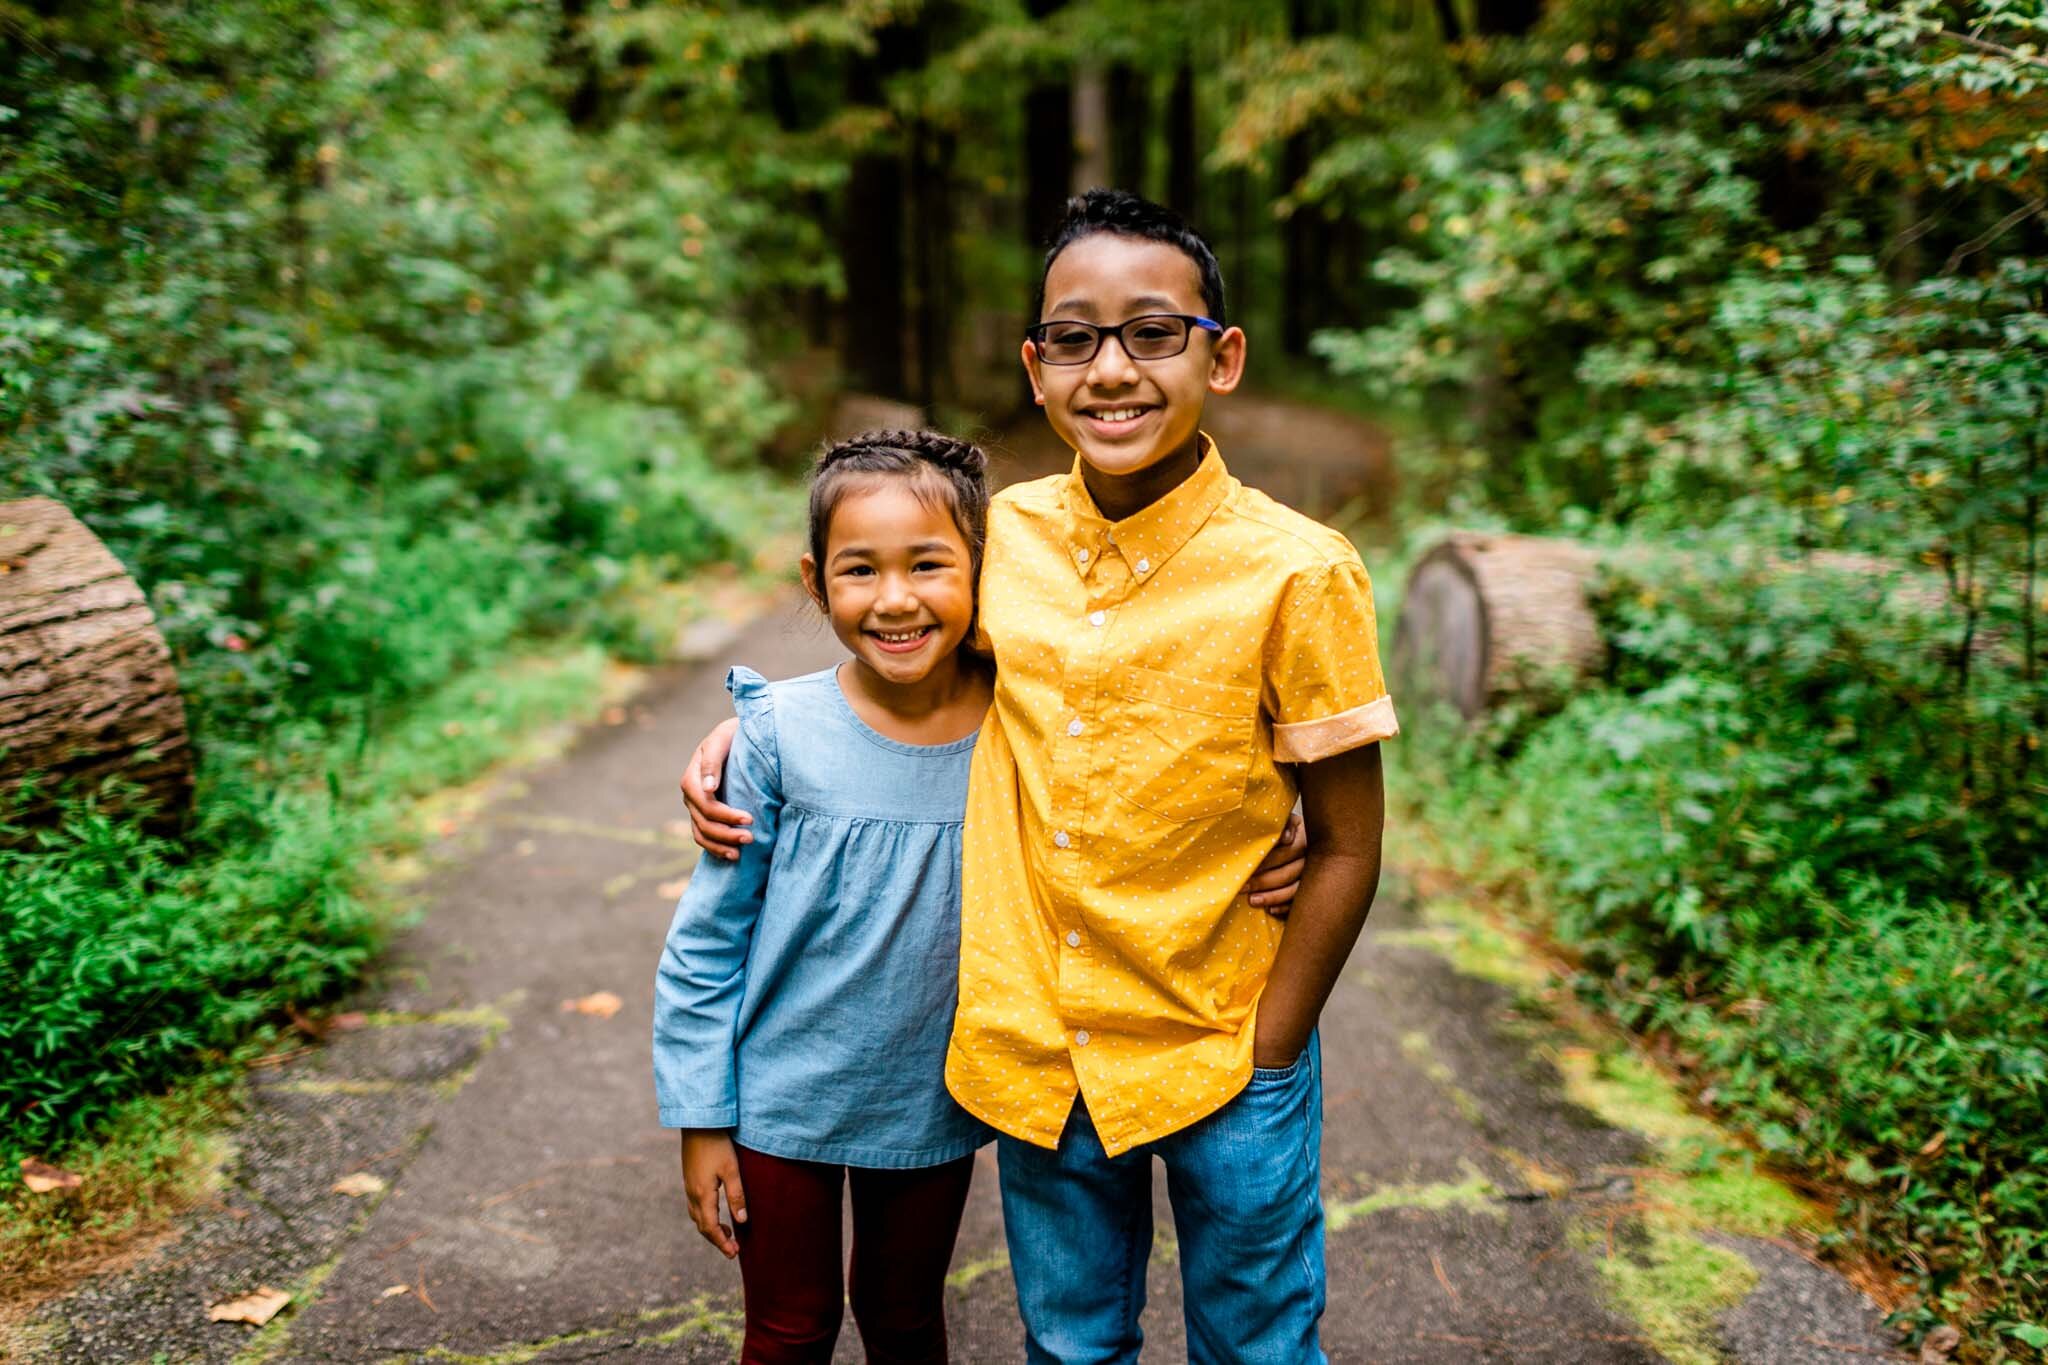 Raleigh Family Photographer | By G. Lin Photography | Umstead Park | Candid portrait of young brother and sister